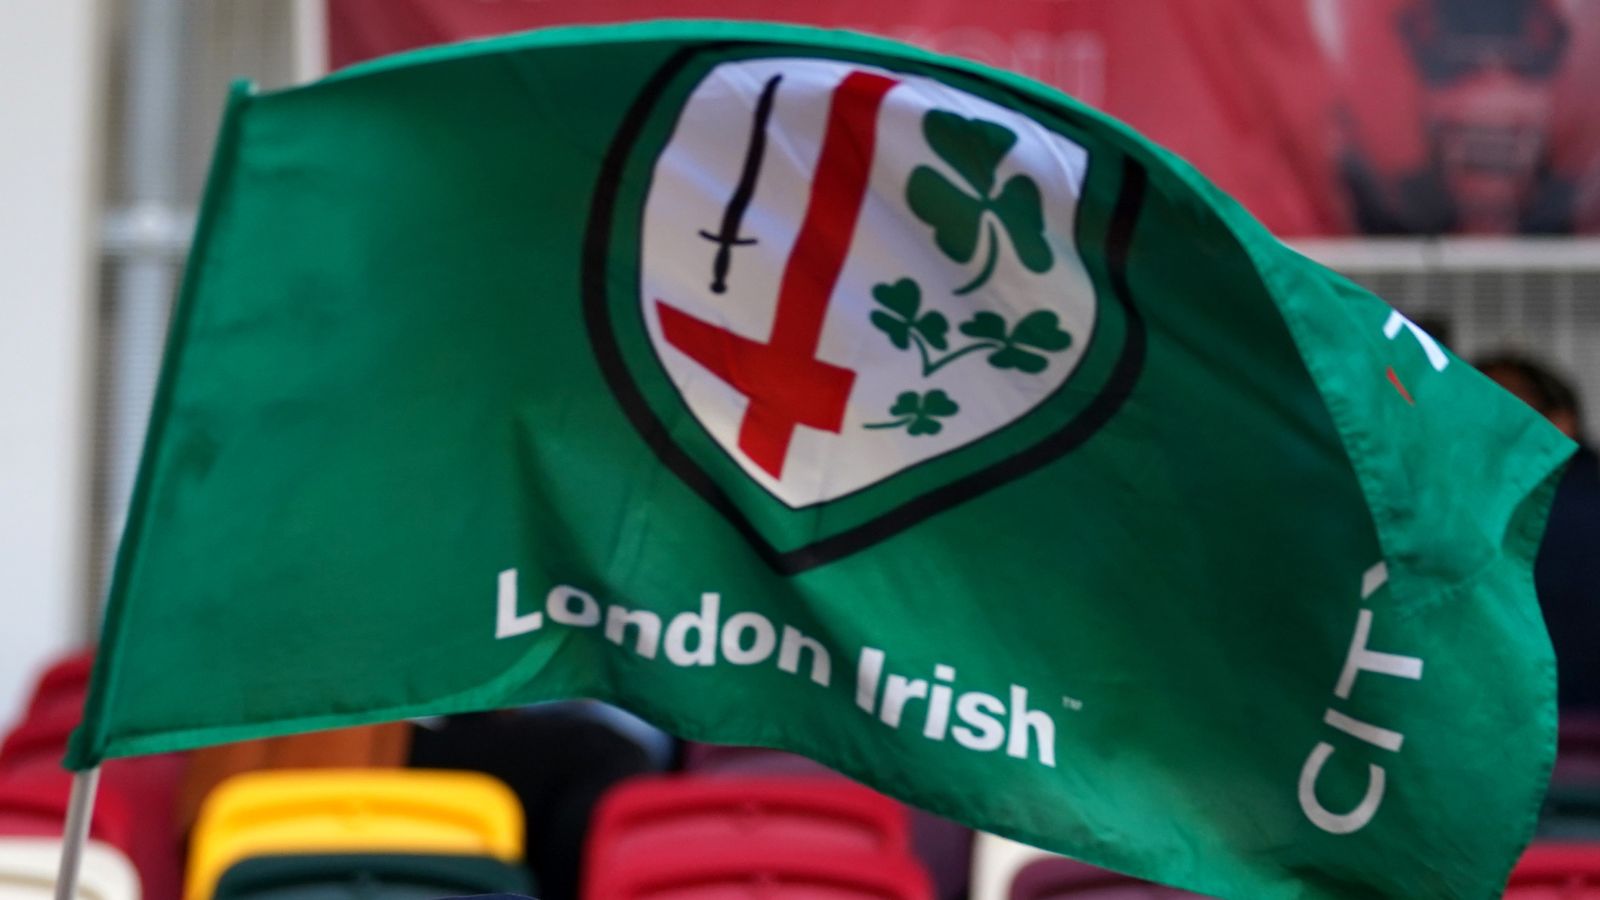 London Irish Gallagher Premiership club given May 30 takeover deadline by RFU Rugby Union News Sky Sports